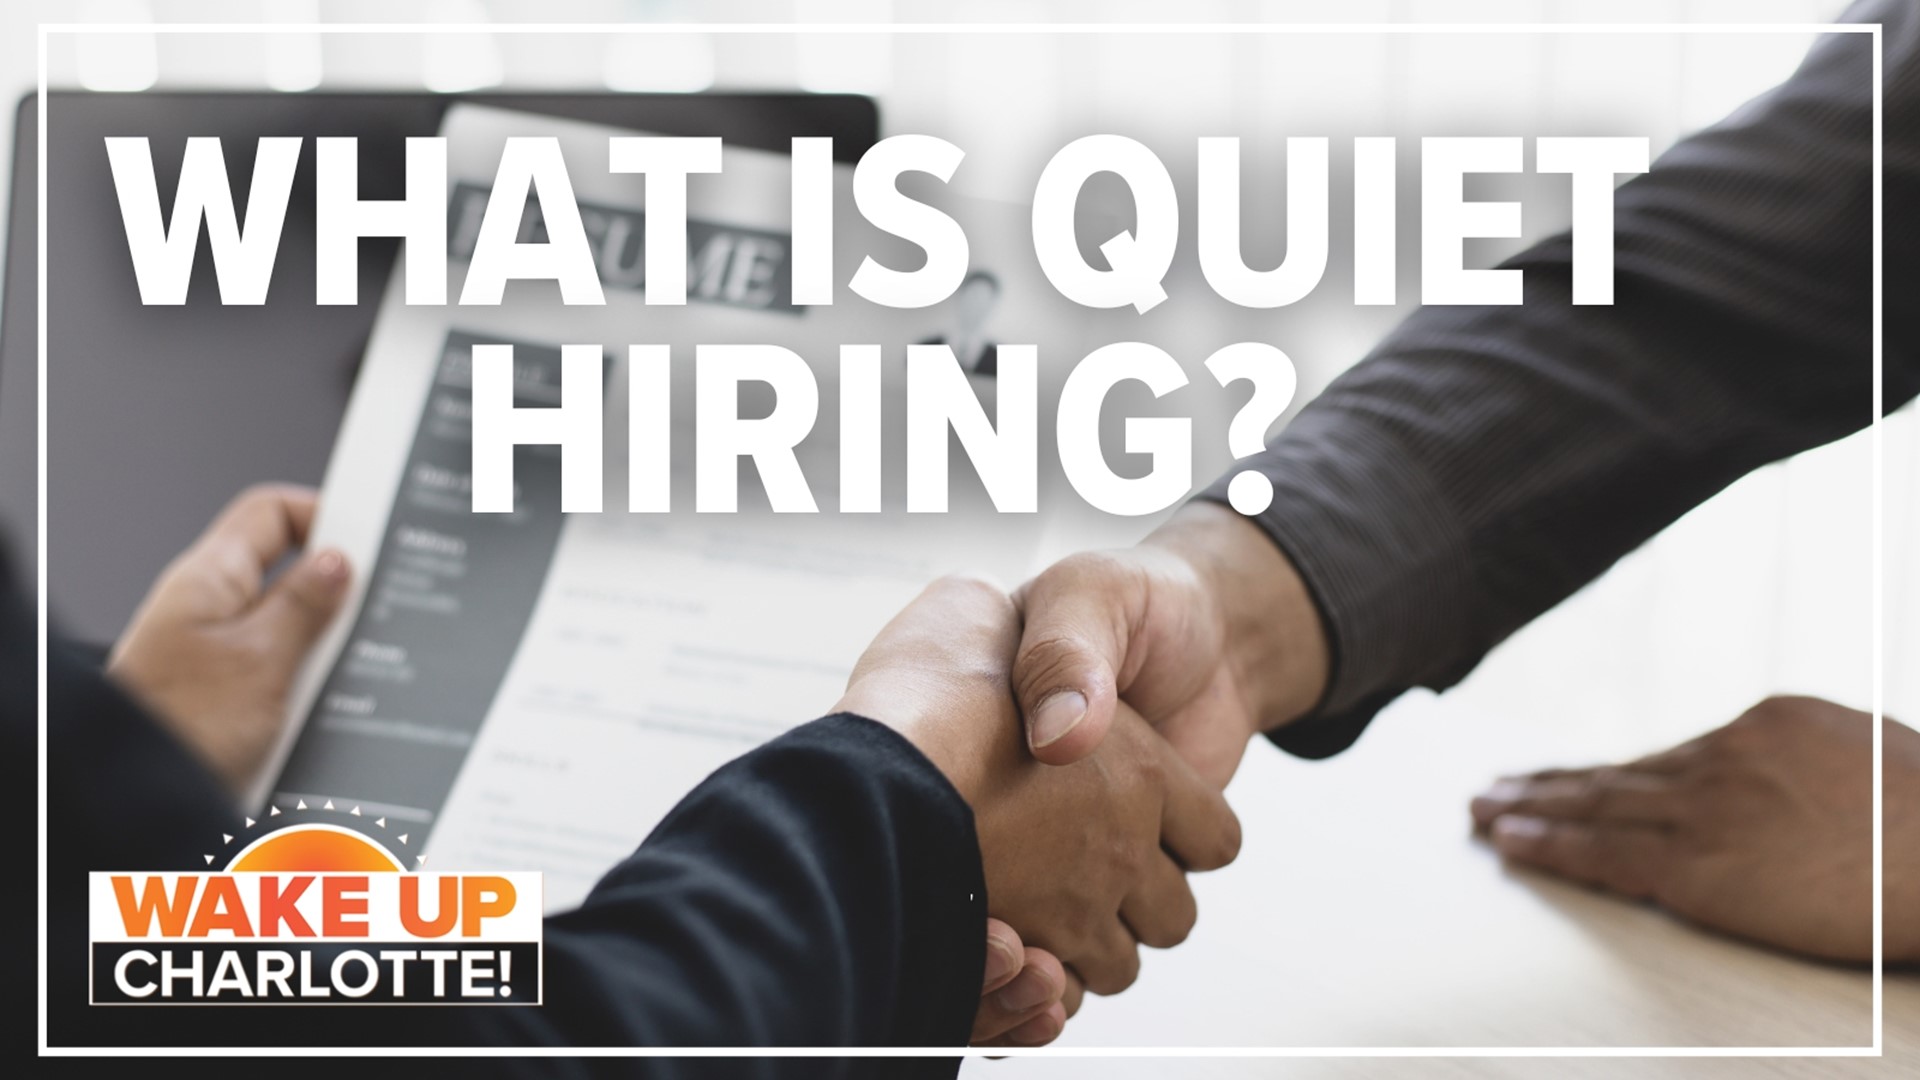 Quiet hiring is when a business expands its capabilities without actually hiring new full-time employees. That's according to management consulting firm Gartner.